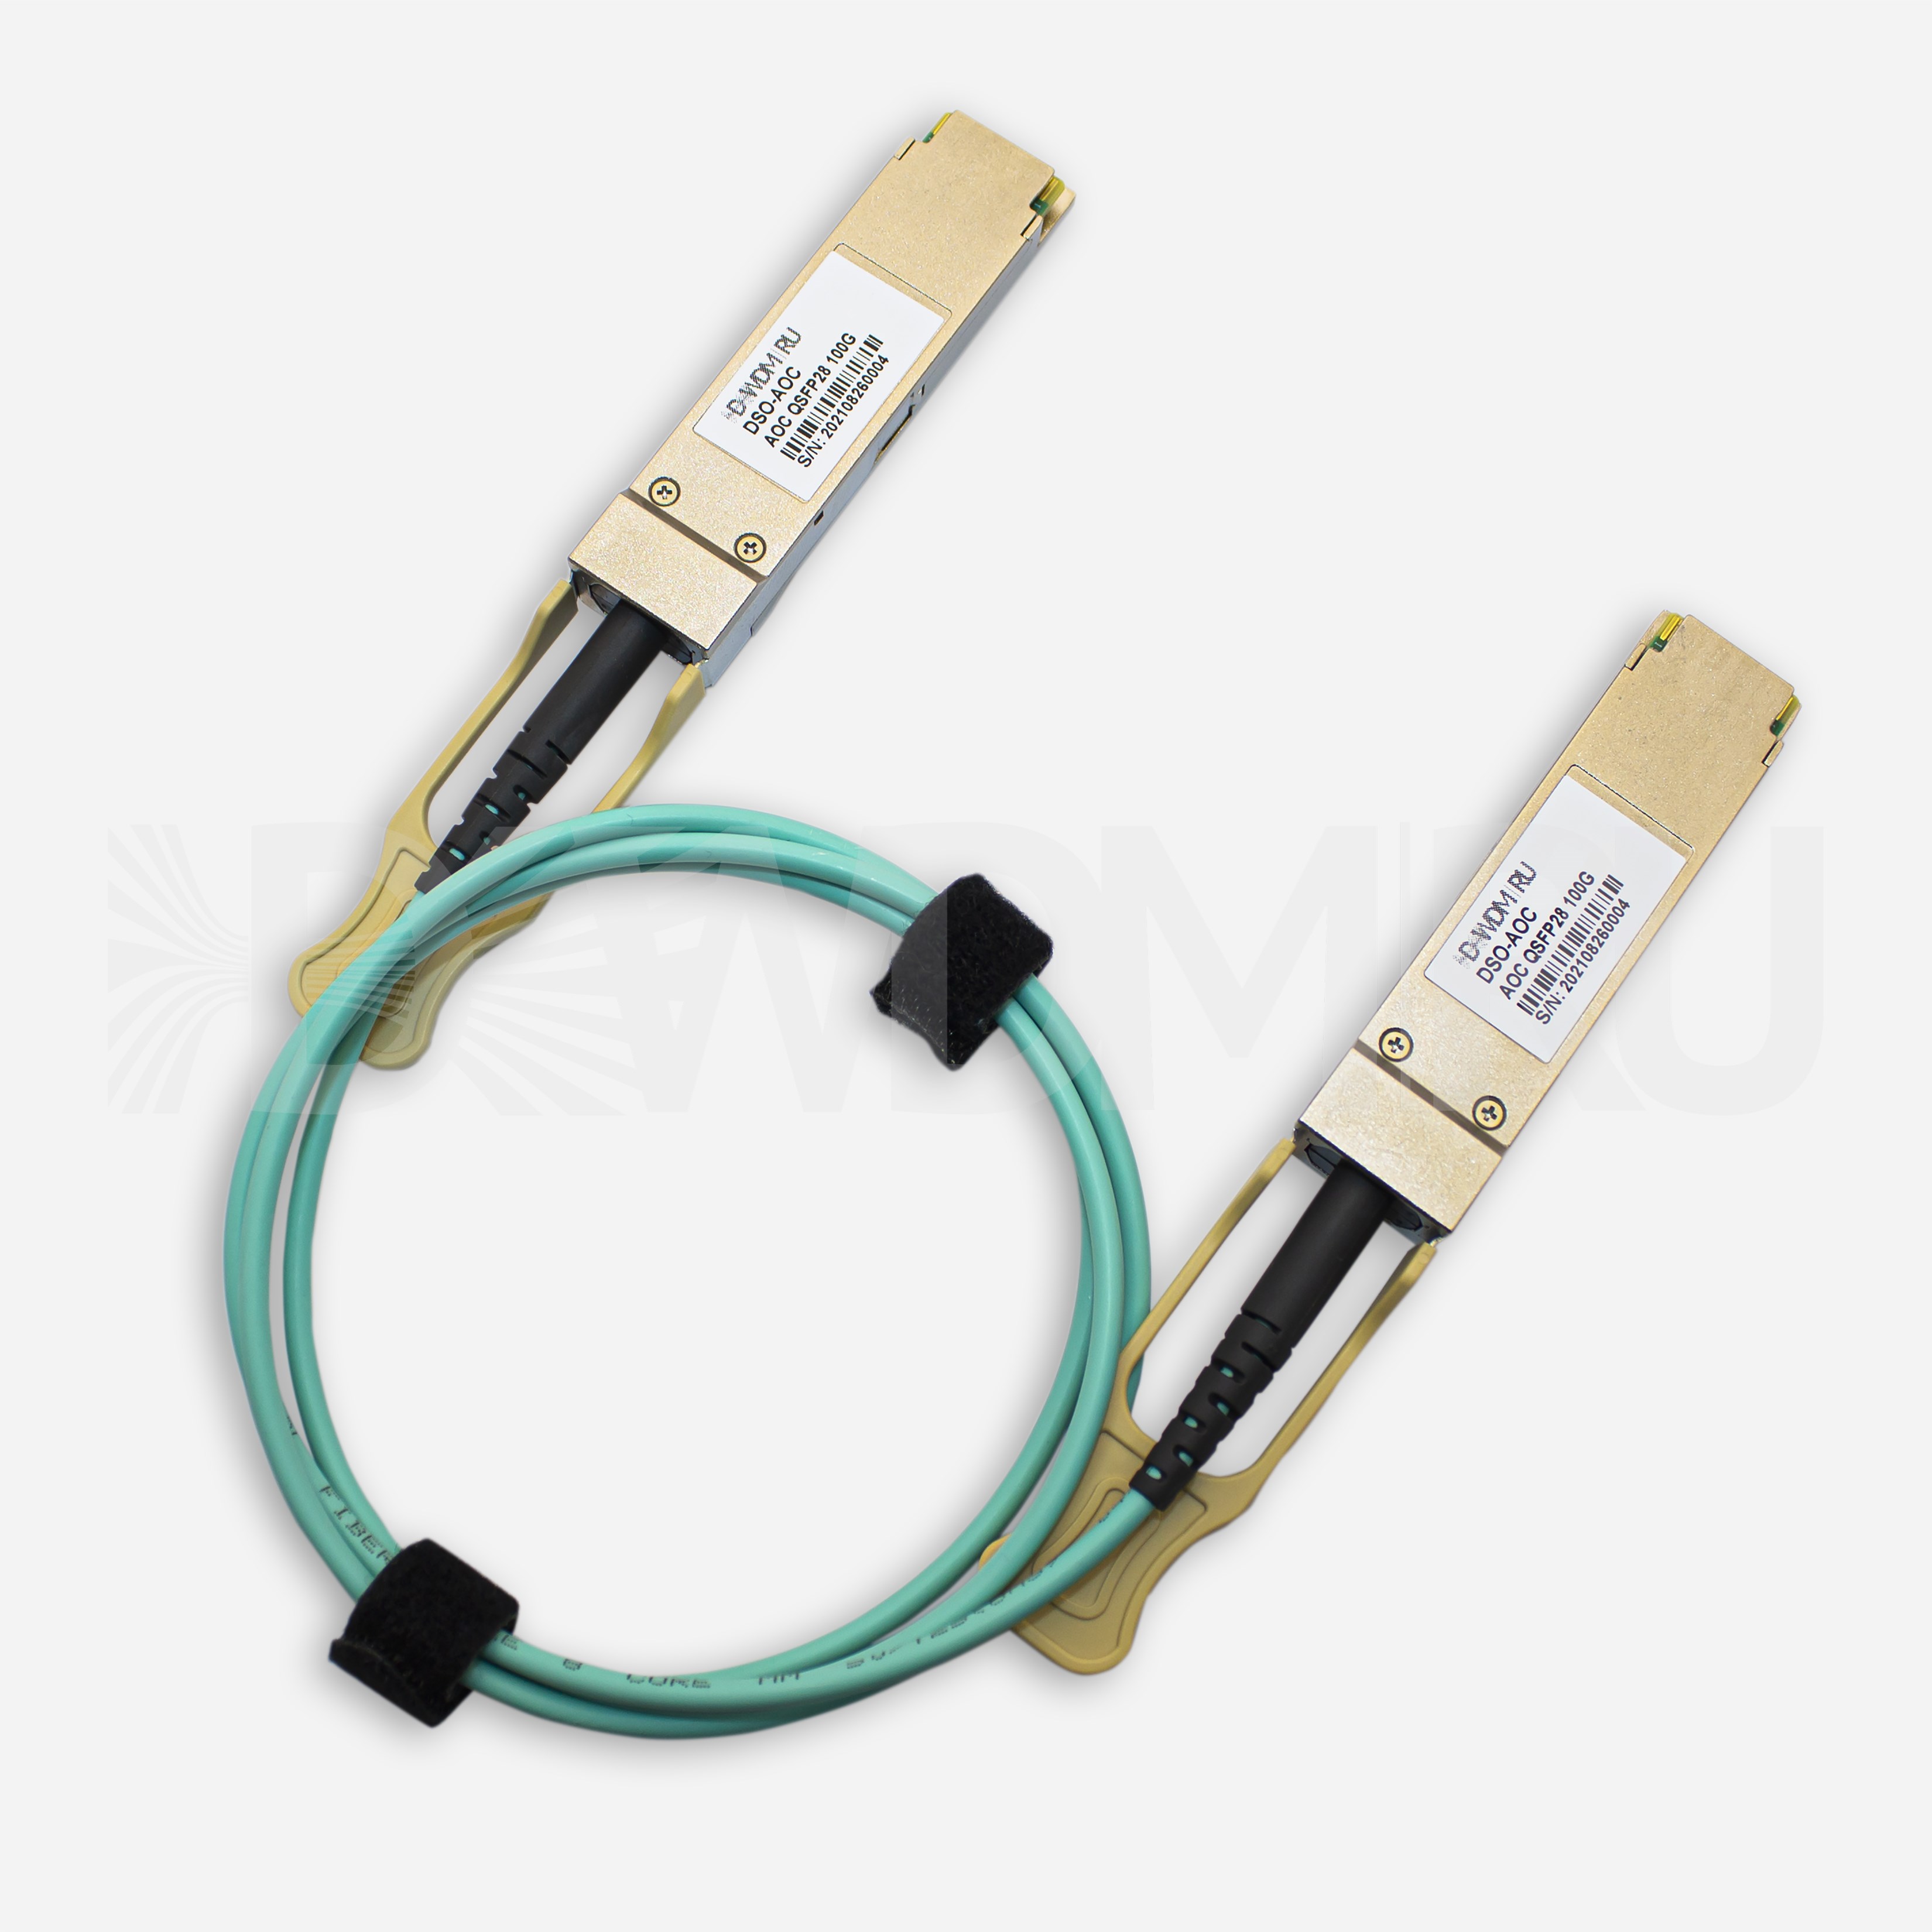 Active Optical Cable, QSFP28, 100 Гб/с, 2 м- ДВДМ.РУ (DSO-AOC-100-2)